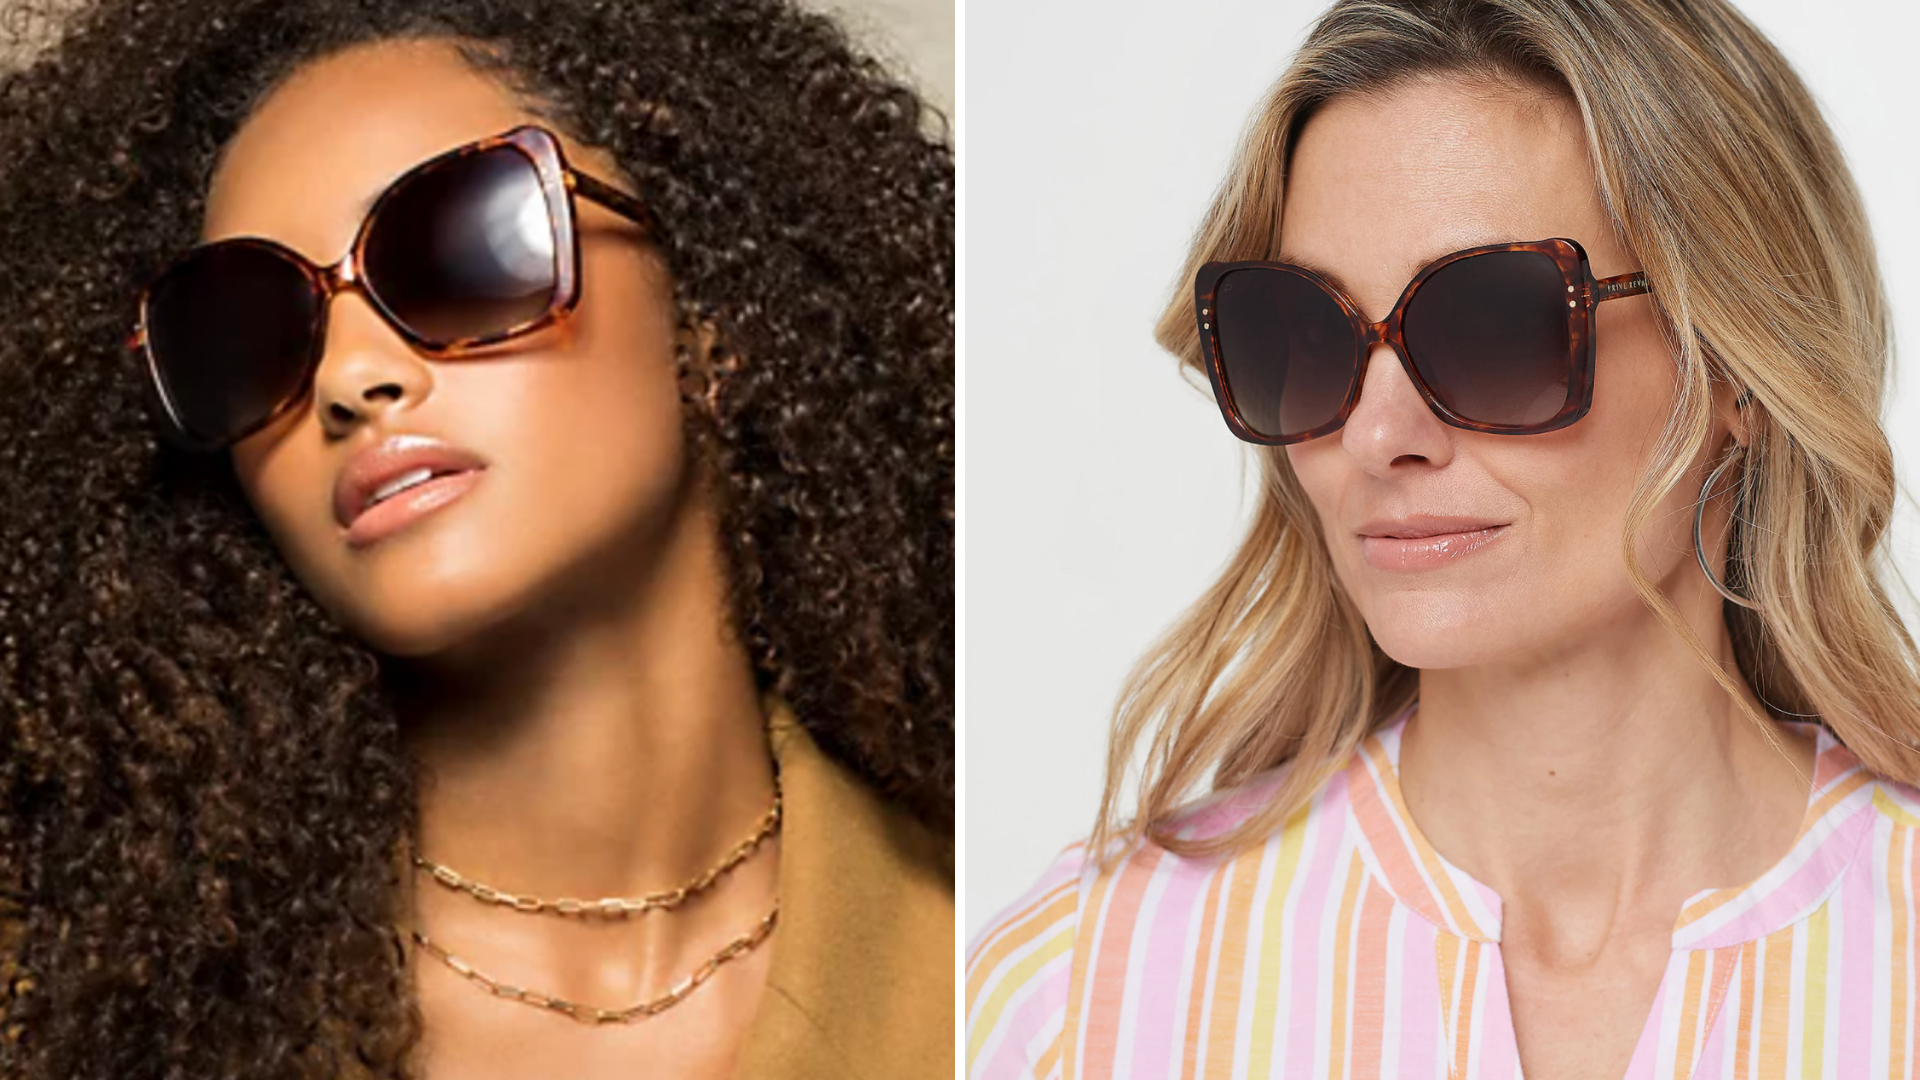 Two models wear large and dark sunglasses.